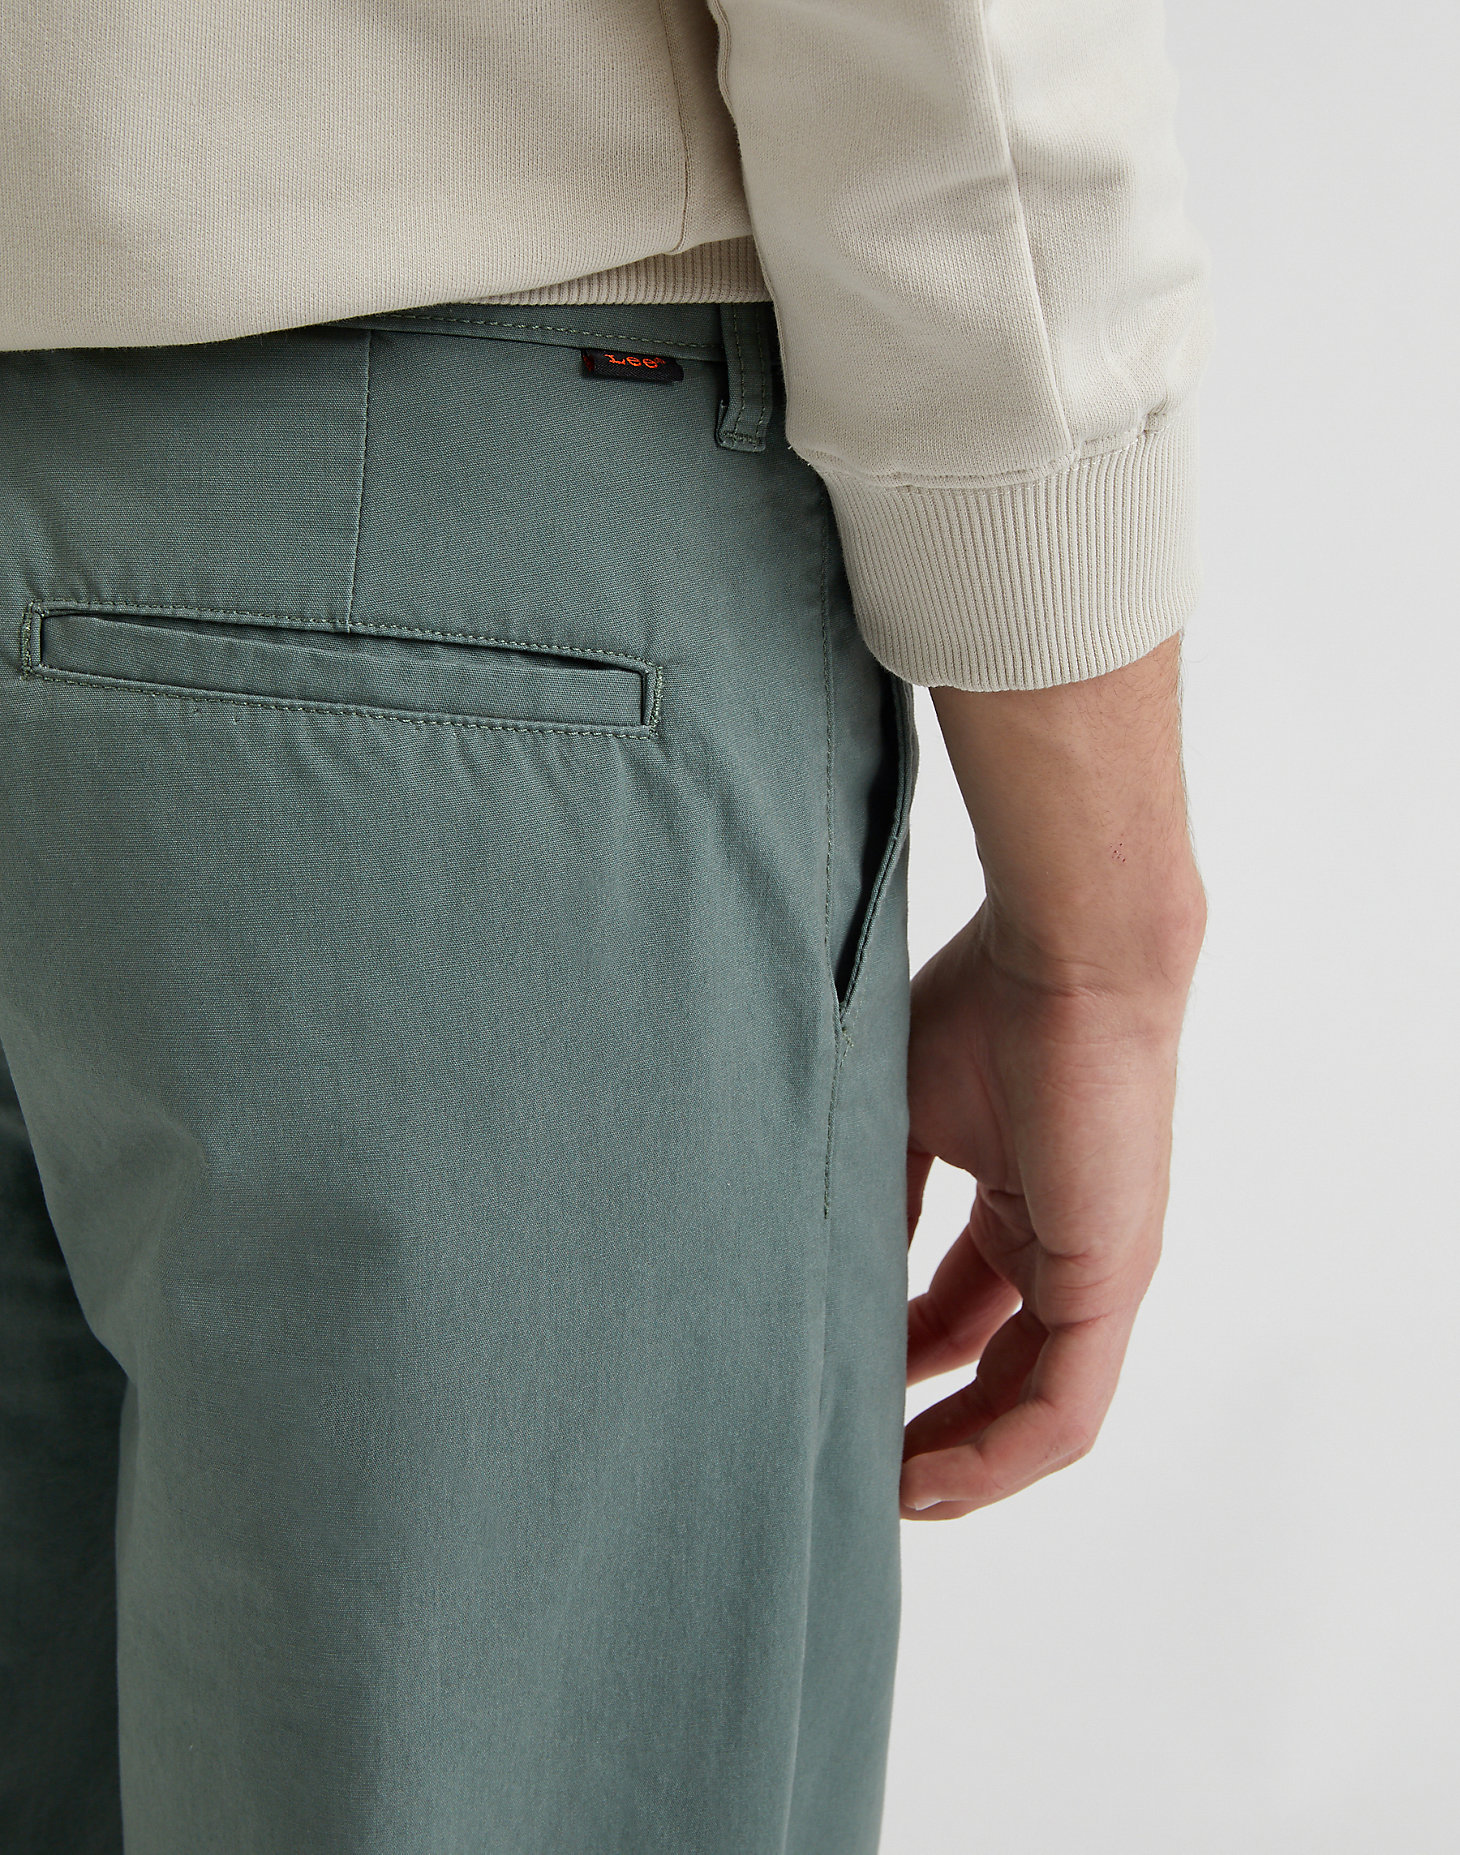 Relaxed Chino in Fort Green alternative view 4